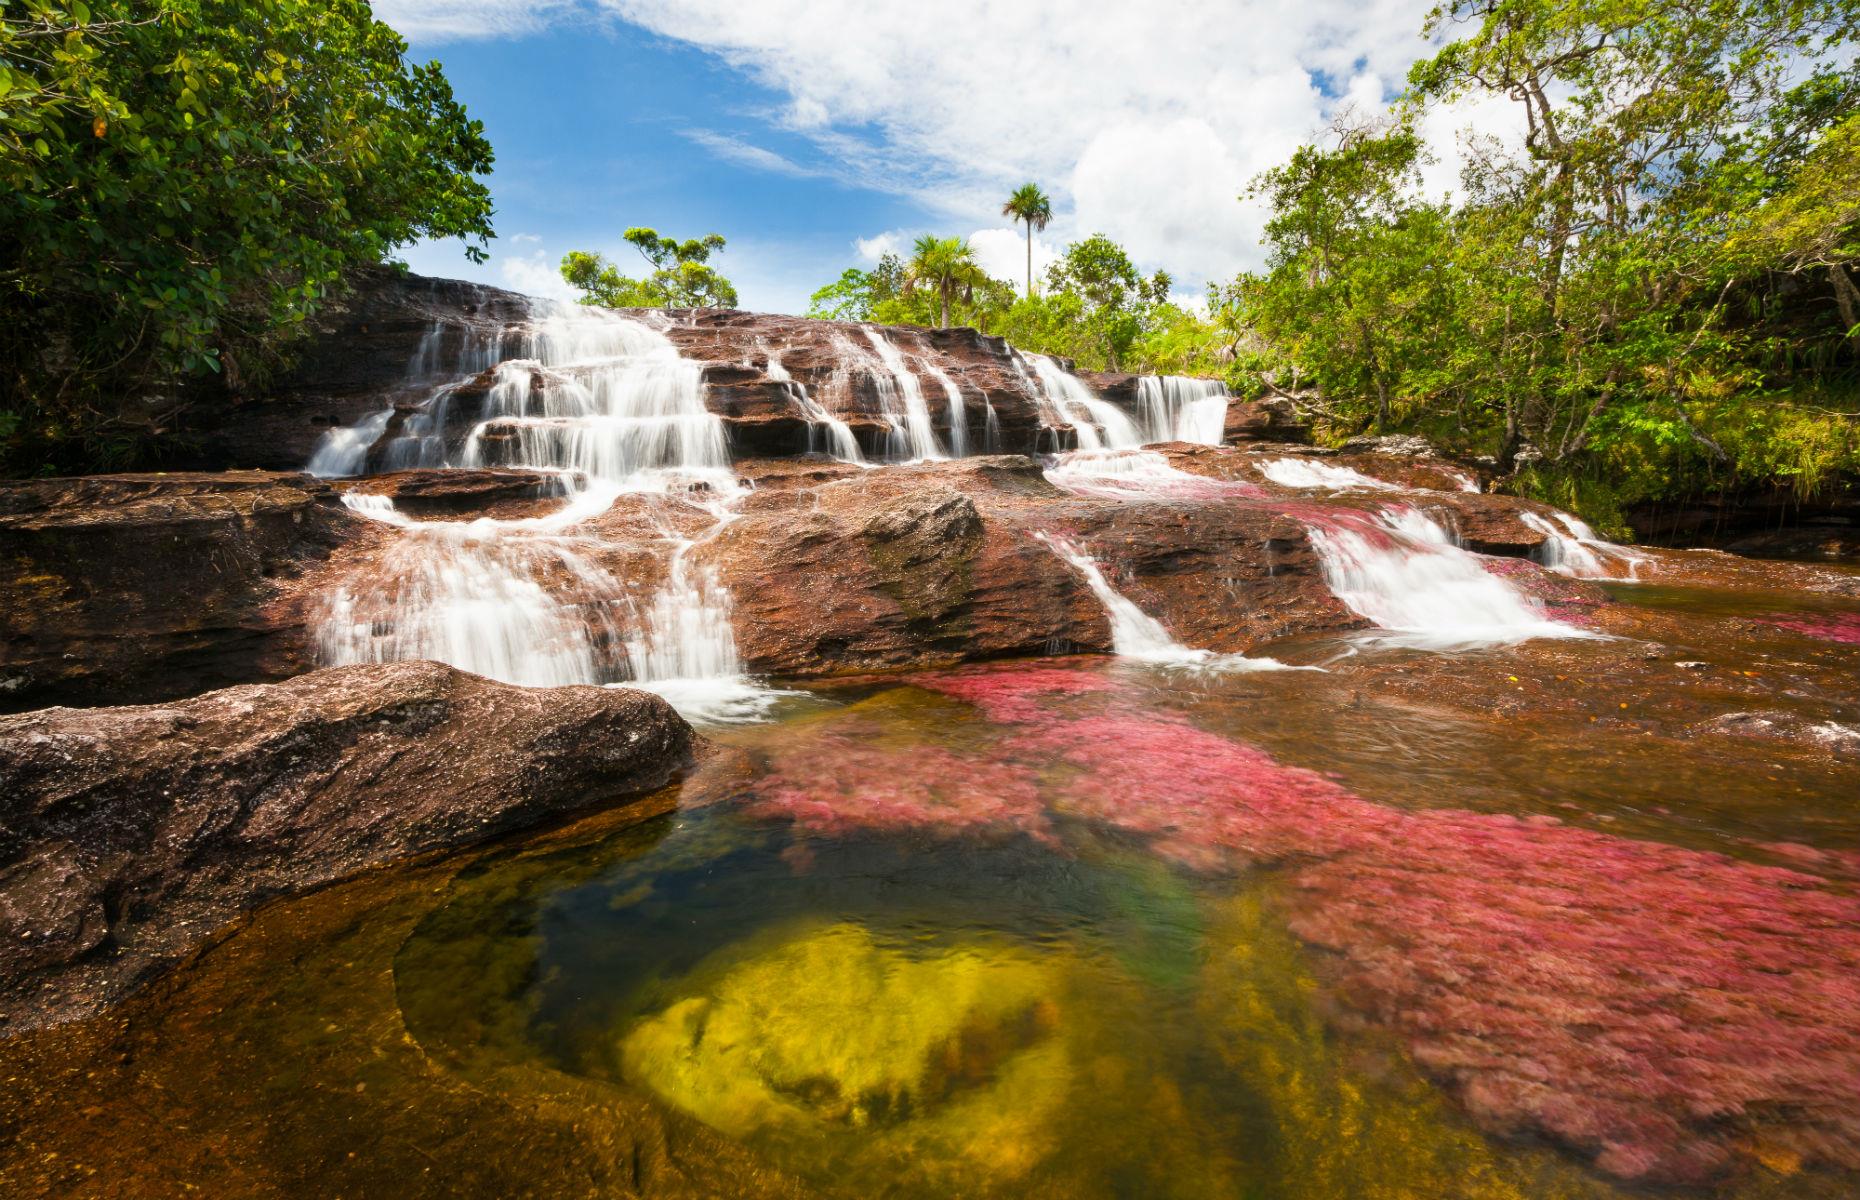 <p>When it comes to beautiful natural phenomena, central Colombia’s Cano Cristales takes some beating. During certain times of the year, the 62-mile-long 'liquid rainbow' river changes color thanks to an aquatic plant called macarenia clavigera, transforming with vibrant shades of yellow, pink, red, green, blue, and orange. Until relatively recently it was too dangerous to visit due to guerrilla activity, but the area is now controlled by the Colombian military and tourists once again have access.</p>